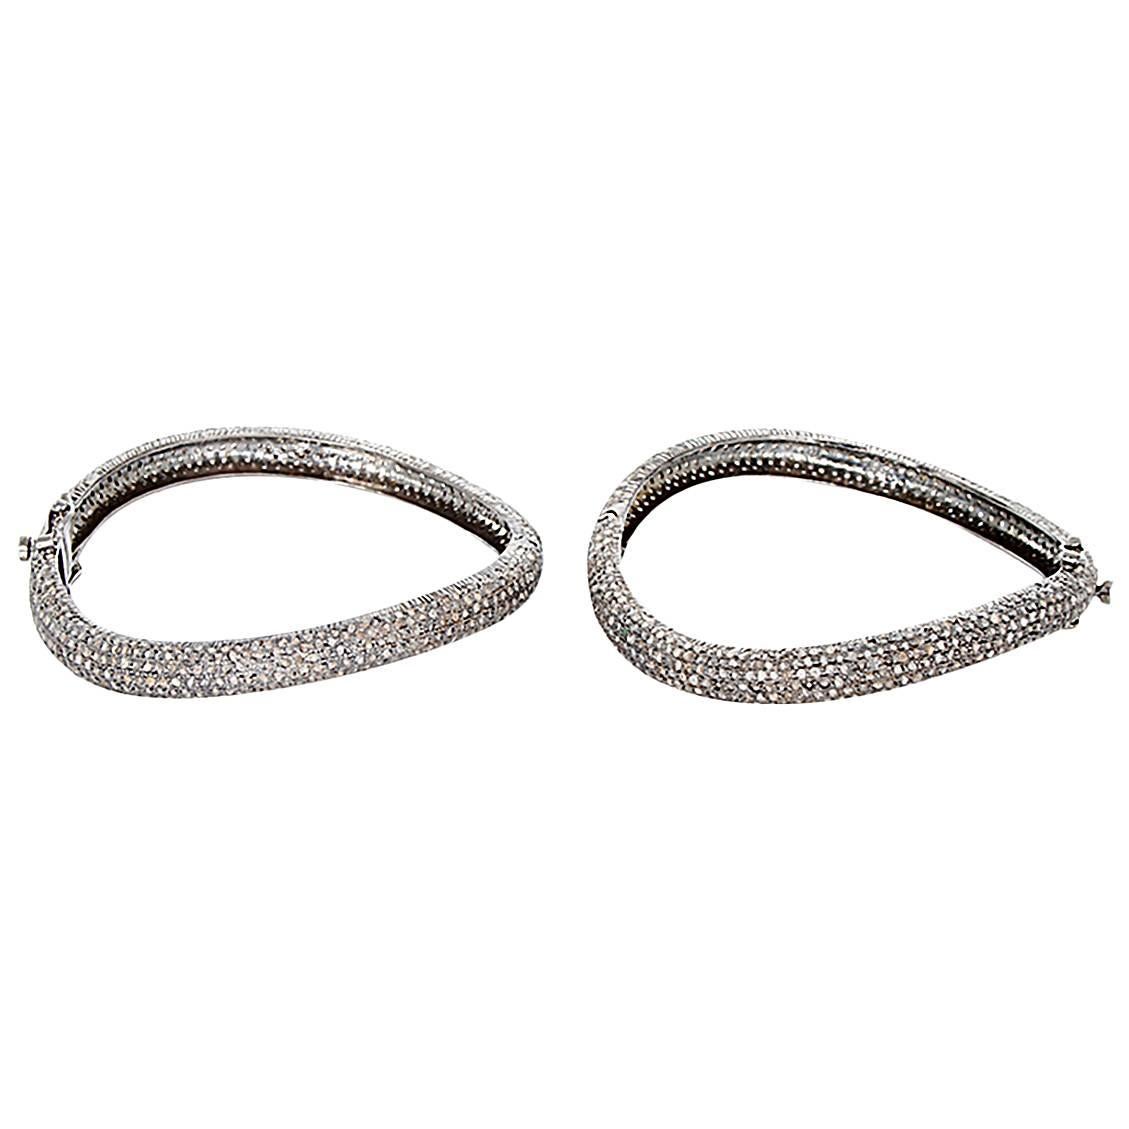 This bohemian style bangle set features a curve design with 13.0 ctw. diamonds set in oxidized sterling silver. This set is perfect for everyday wear and can go from day to night!  Can fit up to a 7-inch wrist. Total weight is 40.0 grams.